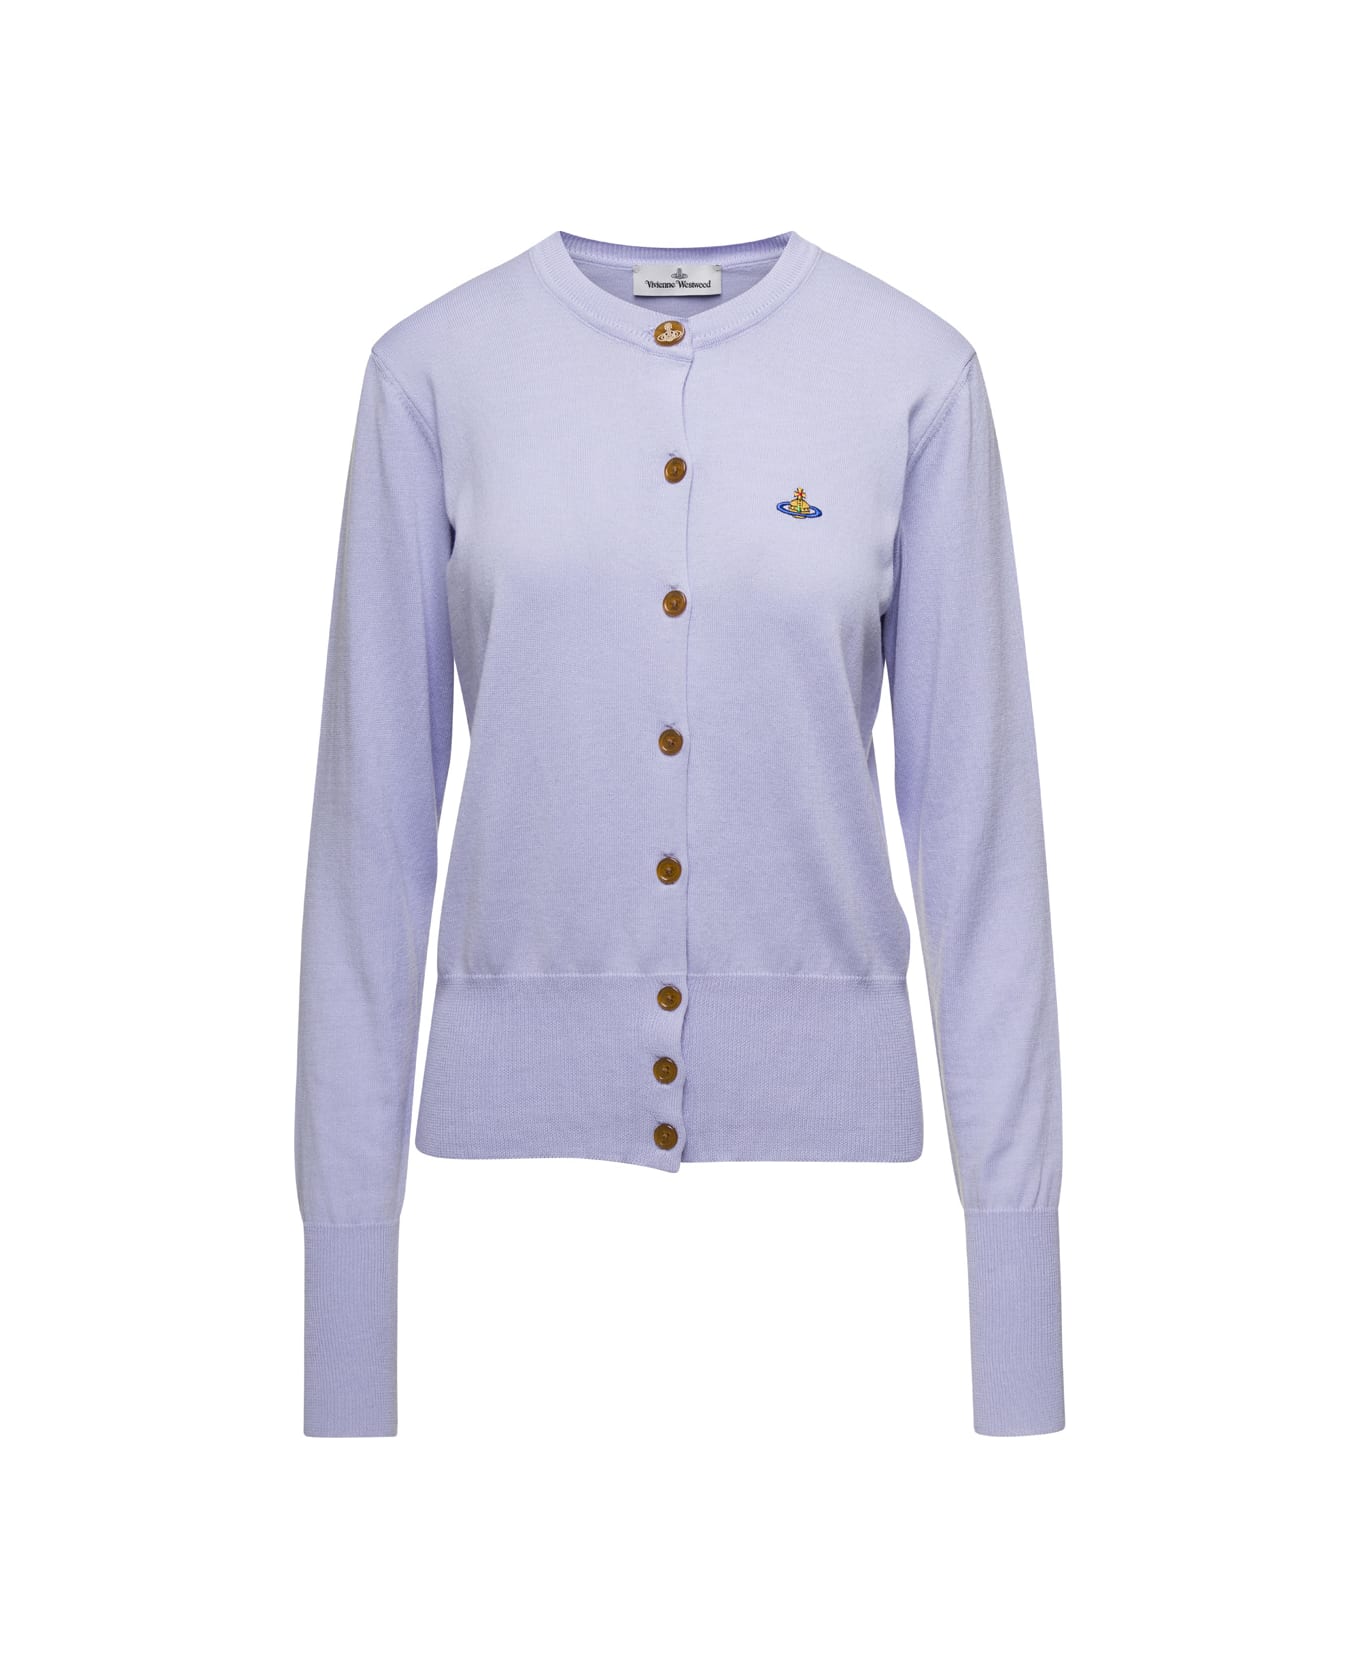 Vivienne Westwood Lillac Cardigan With Signature Embroidered Orb Logo In Cotton Woman - Violet